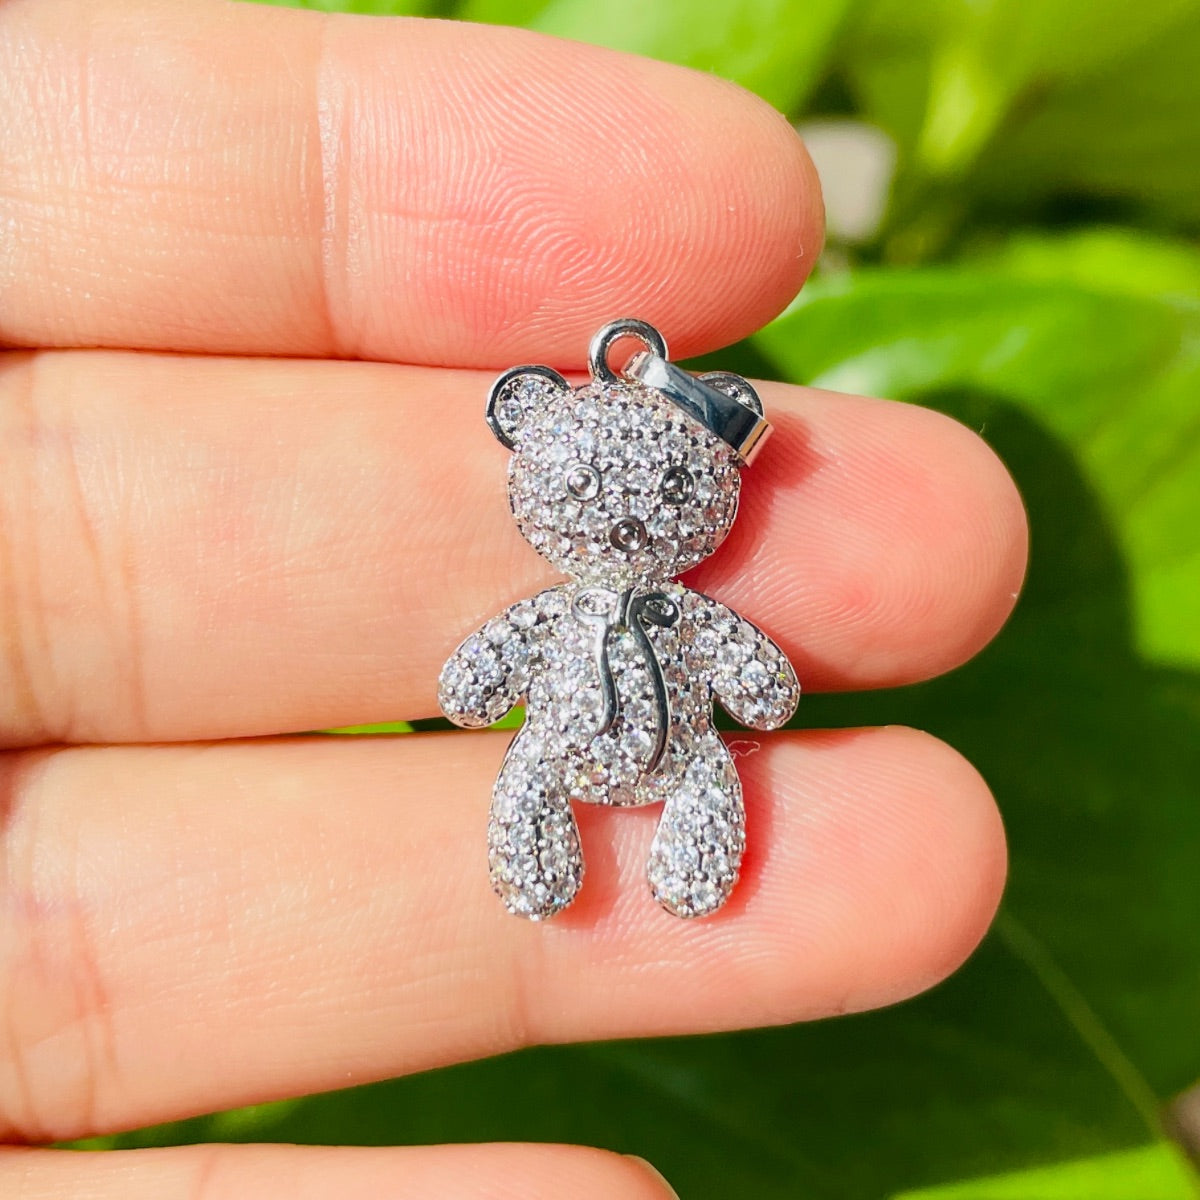 5-10pcs/lot 32*16mm CZ Paved Cute Bear Charms Silver CZ Paved Charms Animals & Insects New Charms Arrivals Charms Beads Beyond